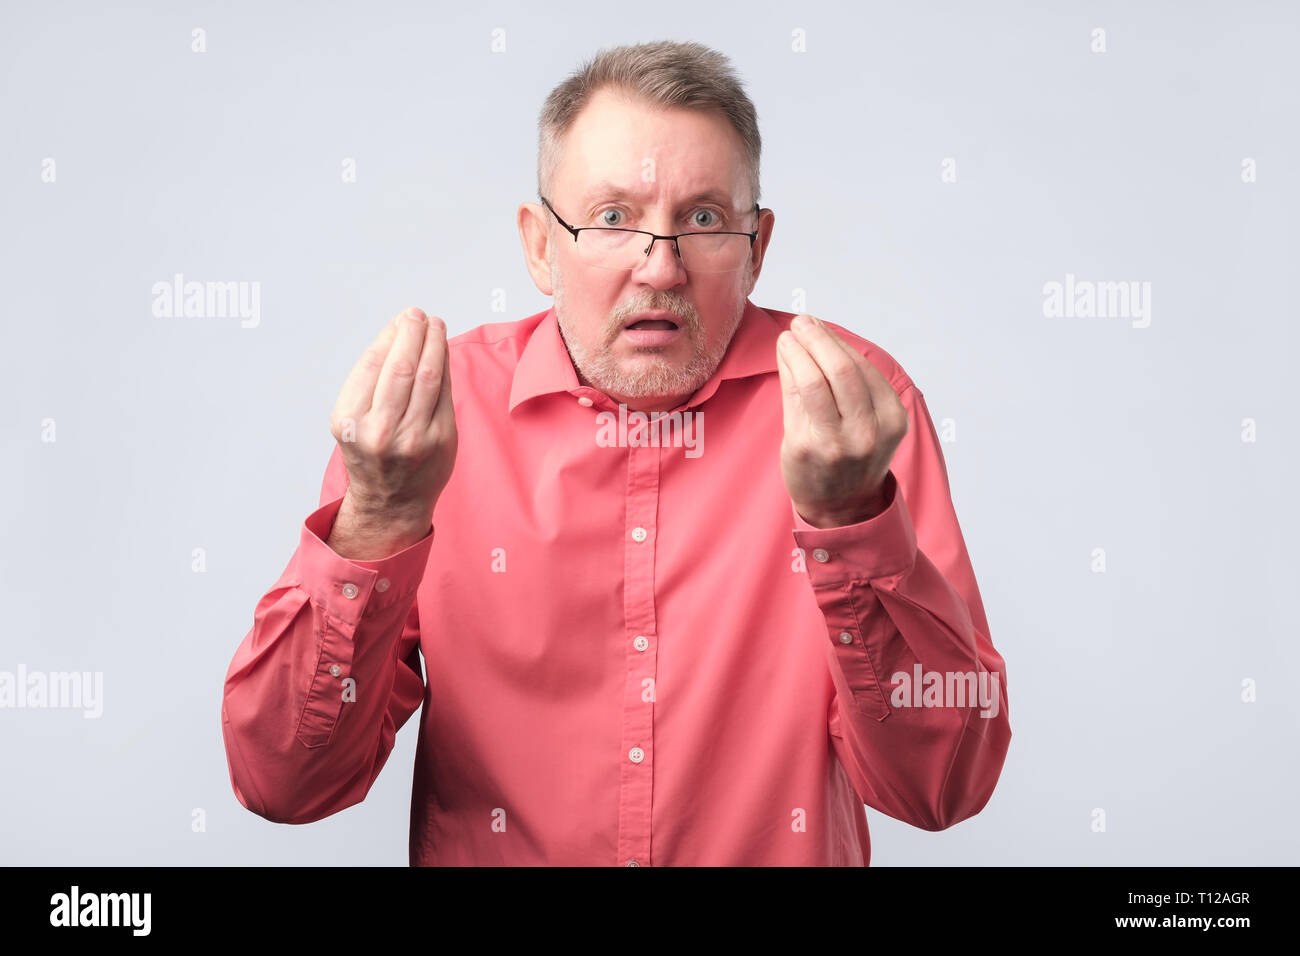 Senior man looking angry showing italian gesture. Stock Photo